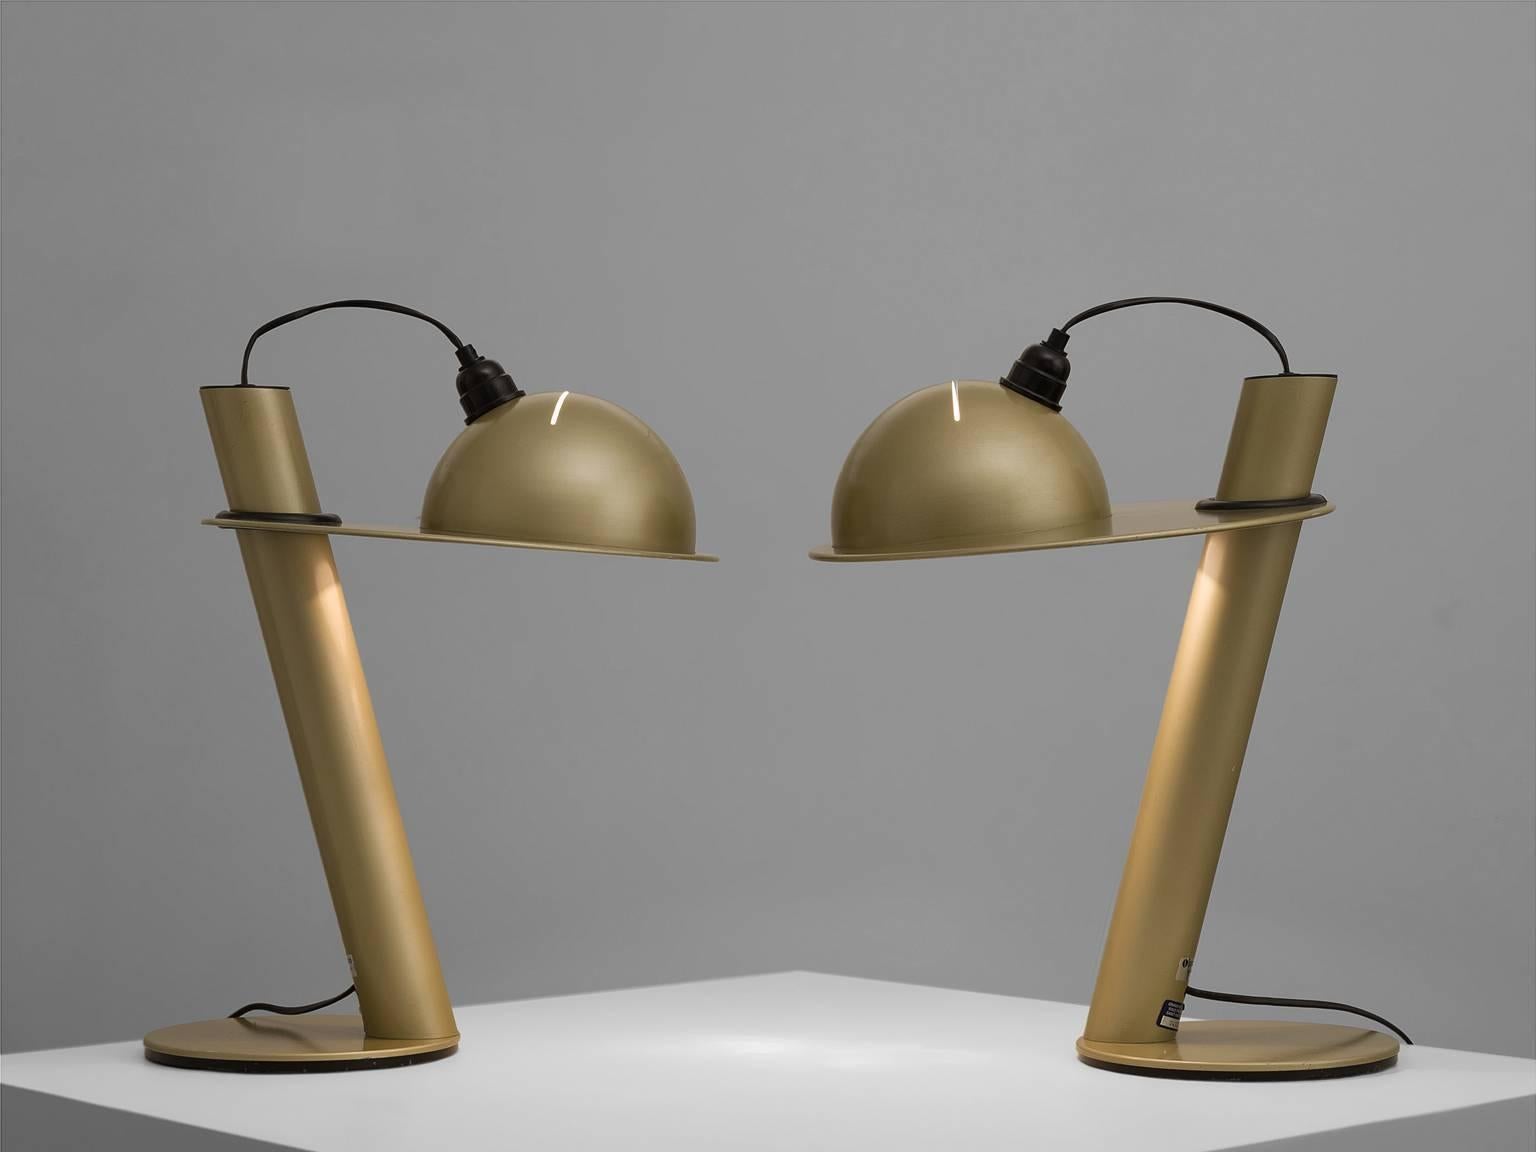 Desk lights, Ettore Sottsass for Stilnovo, enameled metal lamp in taupe, Italy, 1970.

This pair of enamaled table lamps are adjustable in height. They feature a rubber-monted helmet shade. The shaft of these postmodern lights consists of a